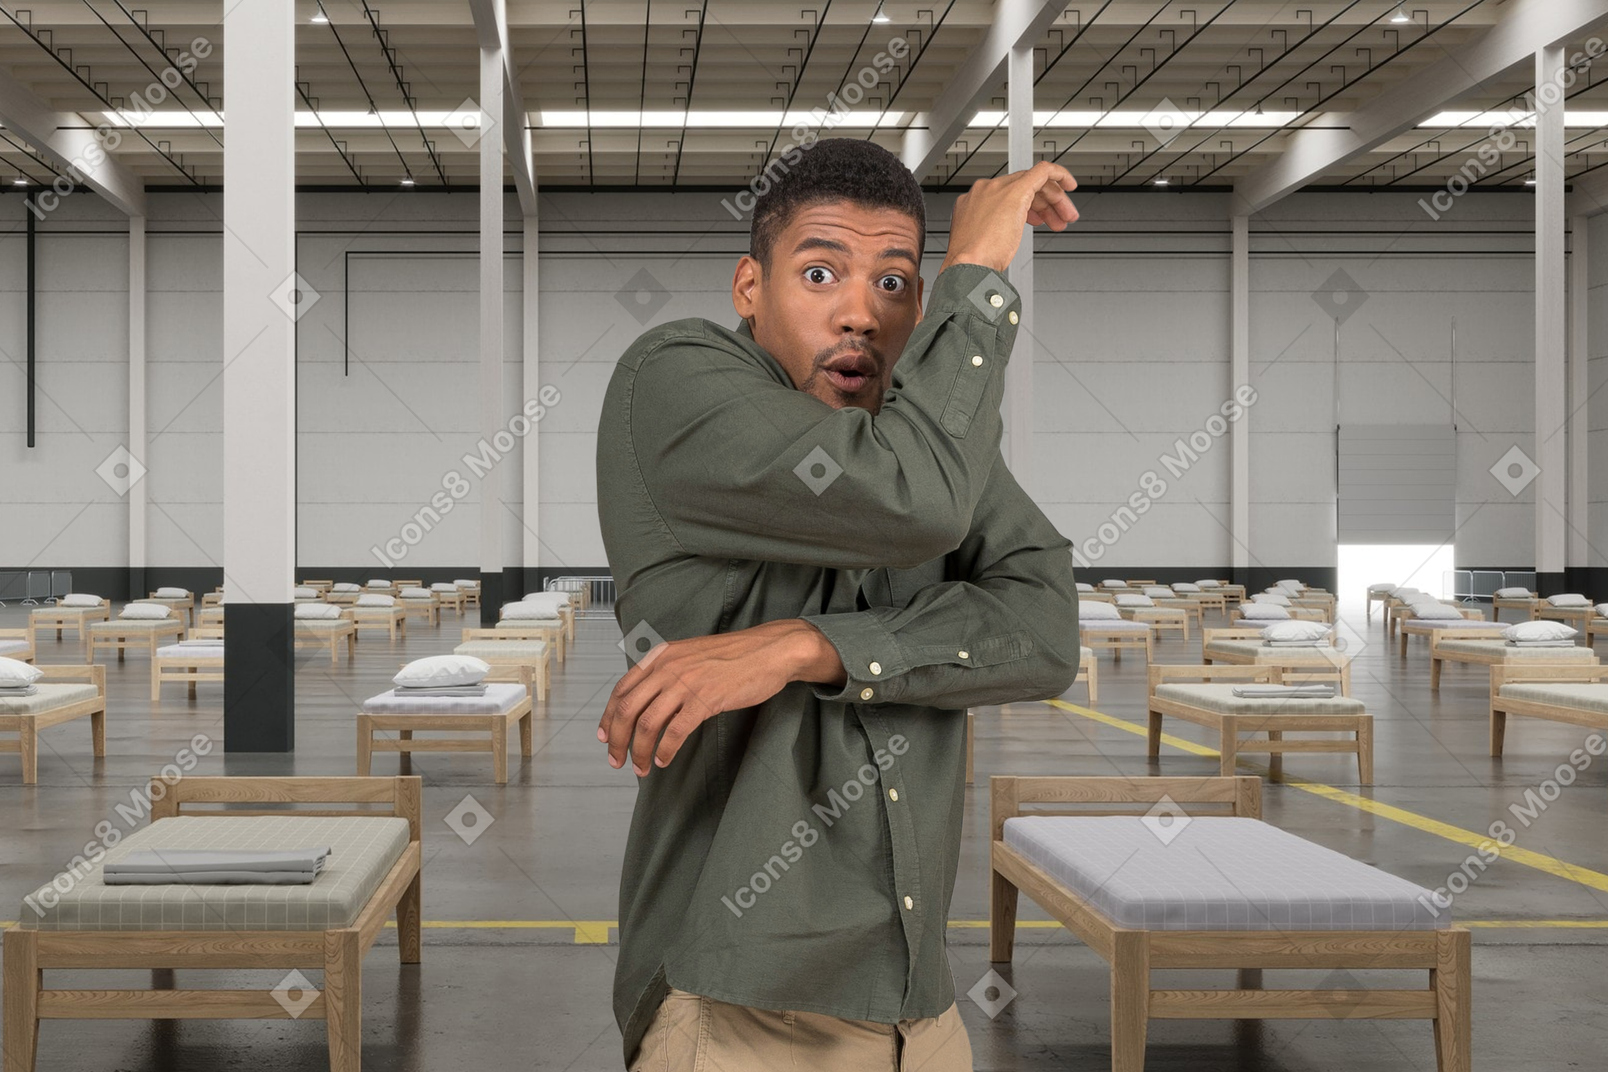 A shocked man standing in a room with beds